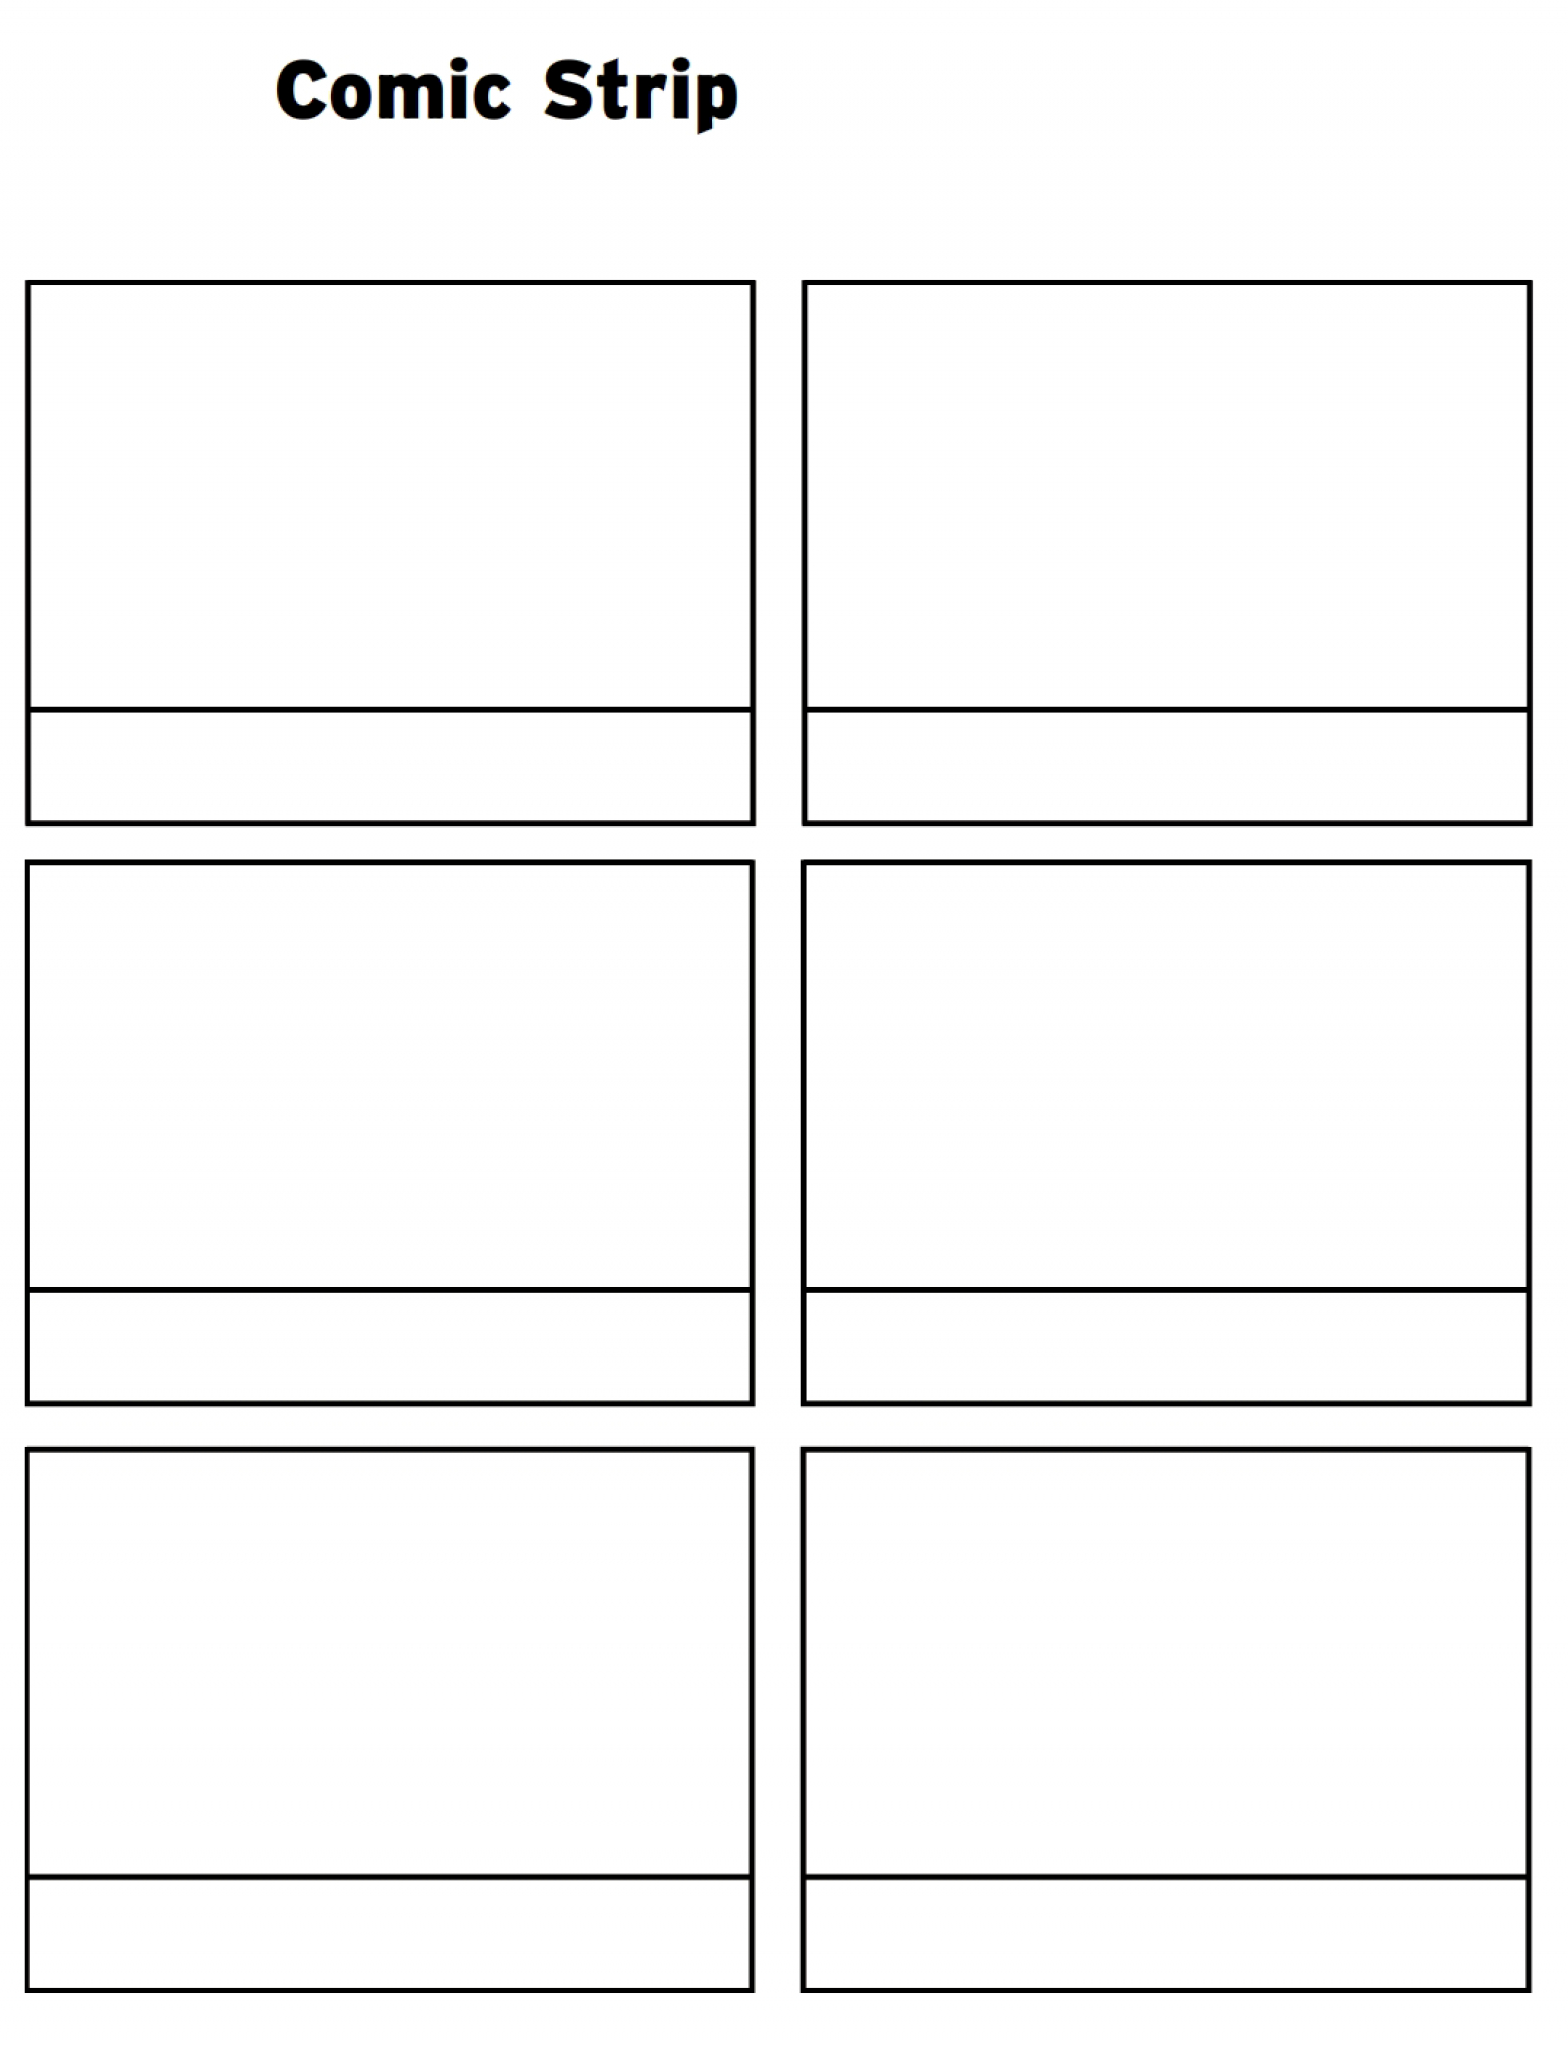 Printable Comic Strip Template Pdf Word Pages | Printable Throughout Printable Blank Comic Strip Template For Kids